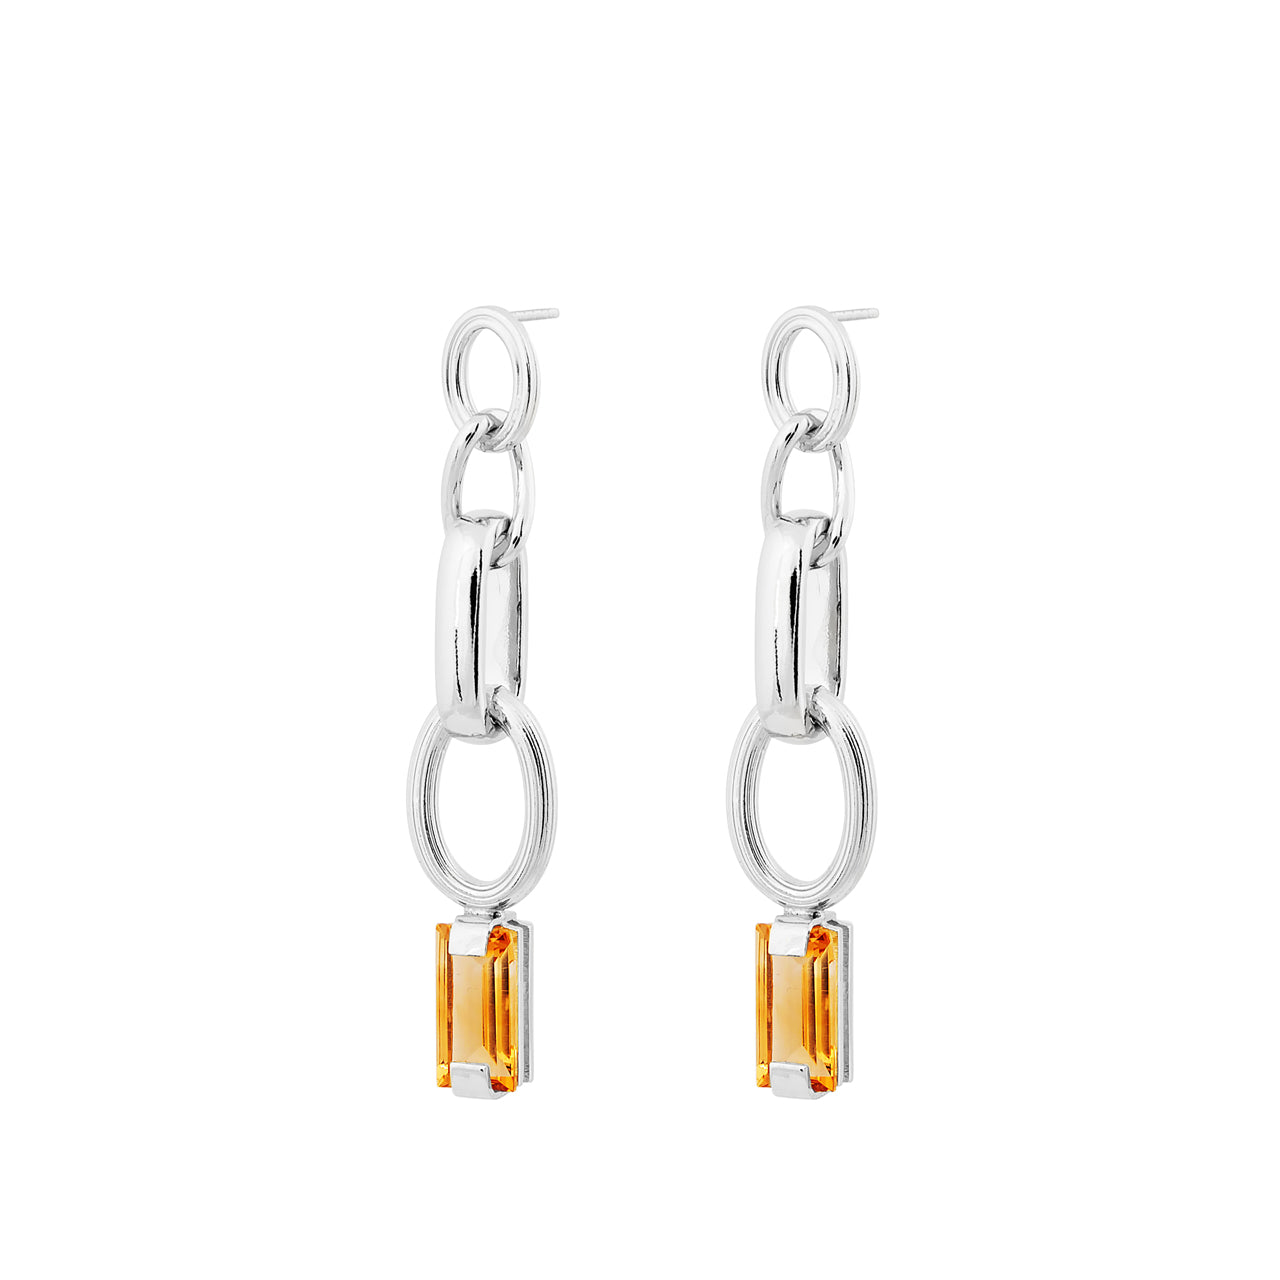 silver shine earrings with citrine